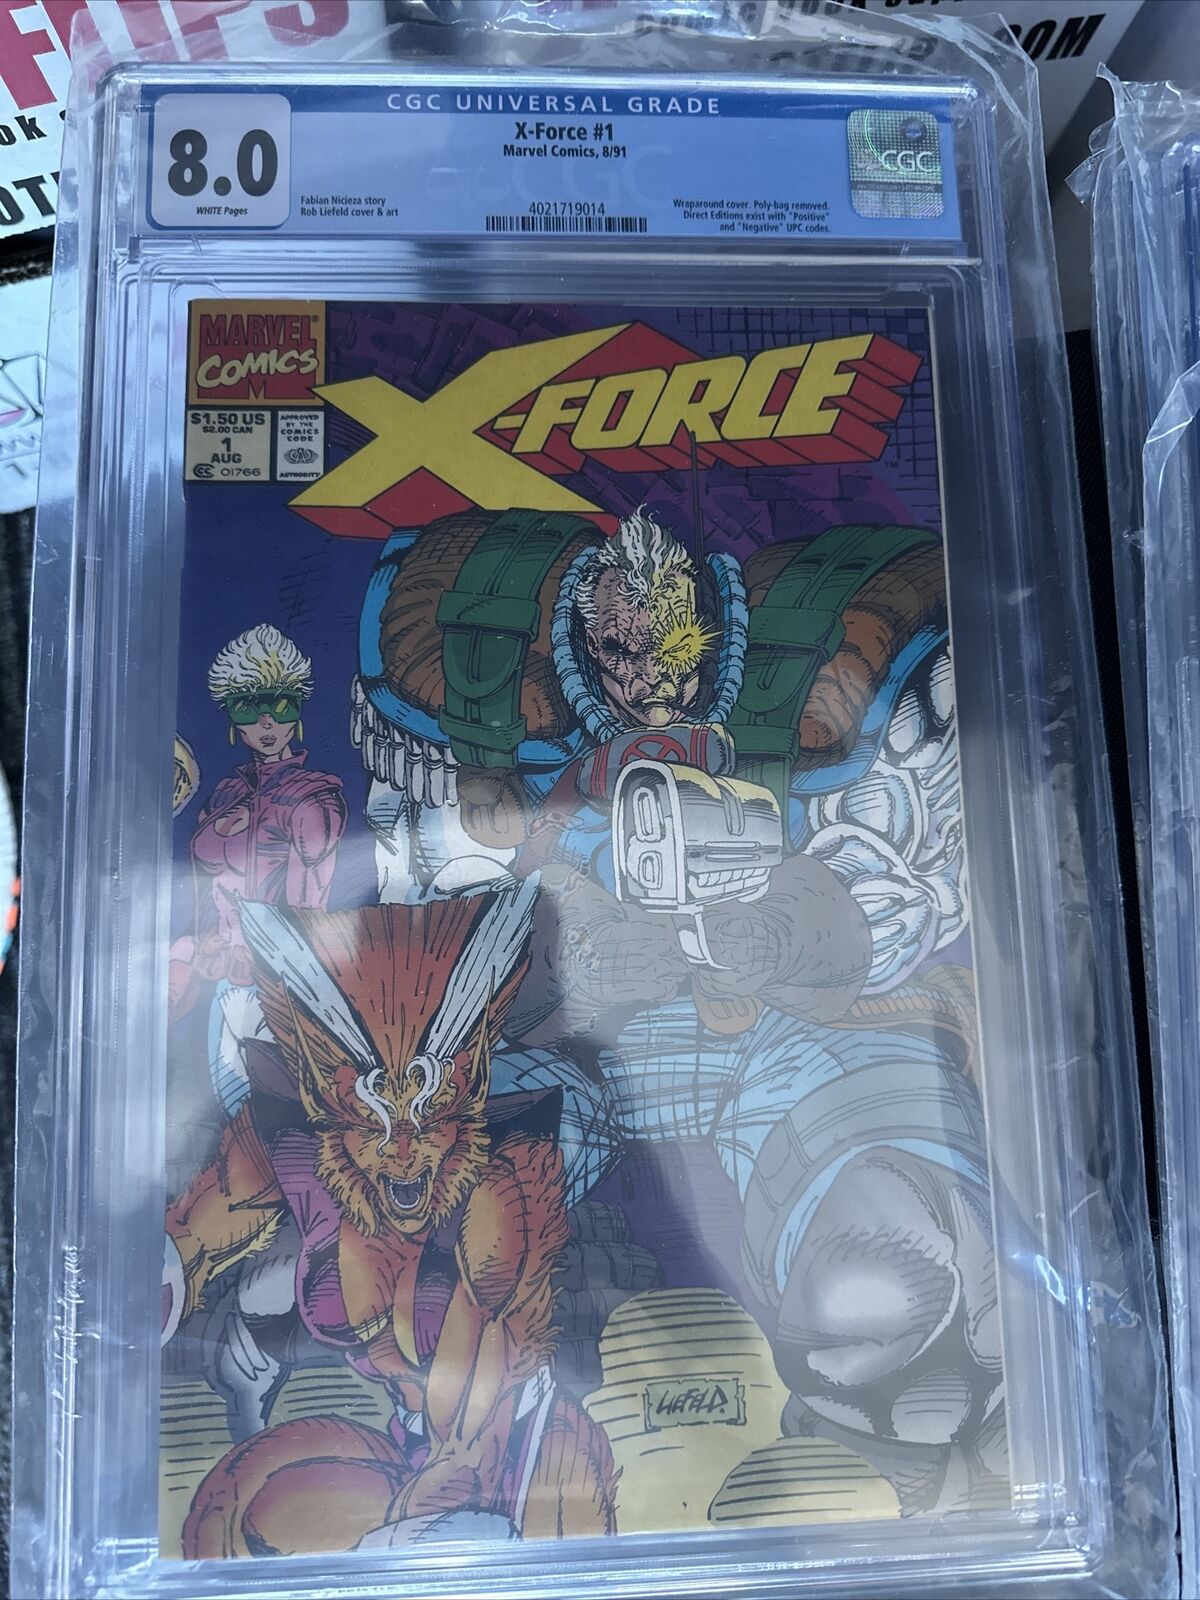 X-Force 1U Unbagged CGC 8.0 1991 may have a card